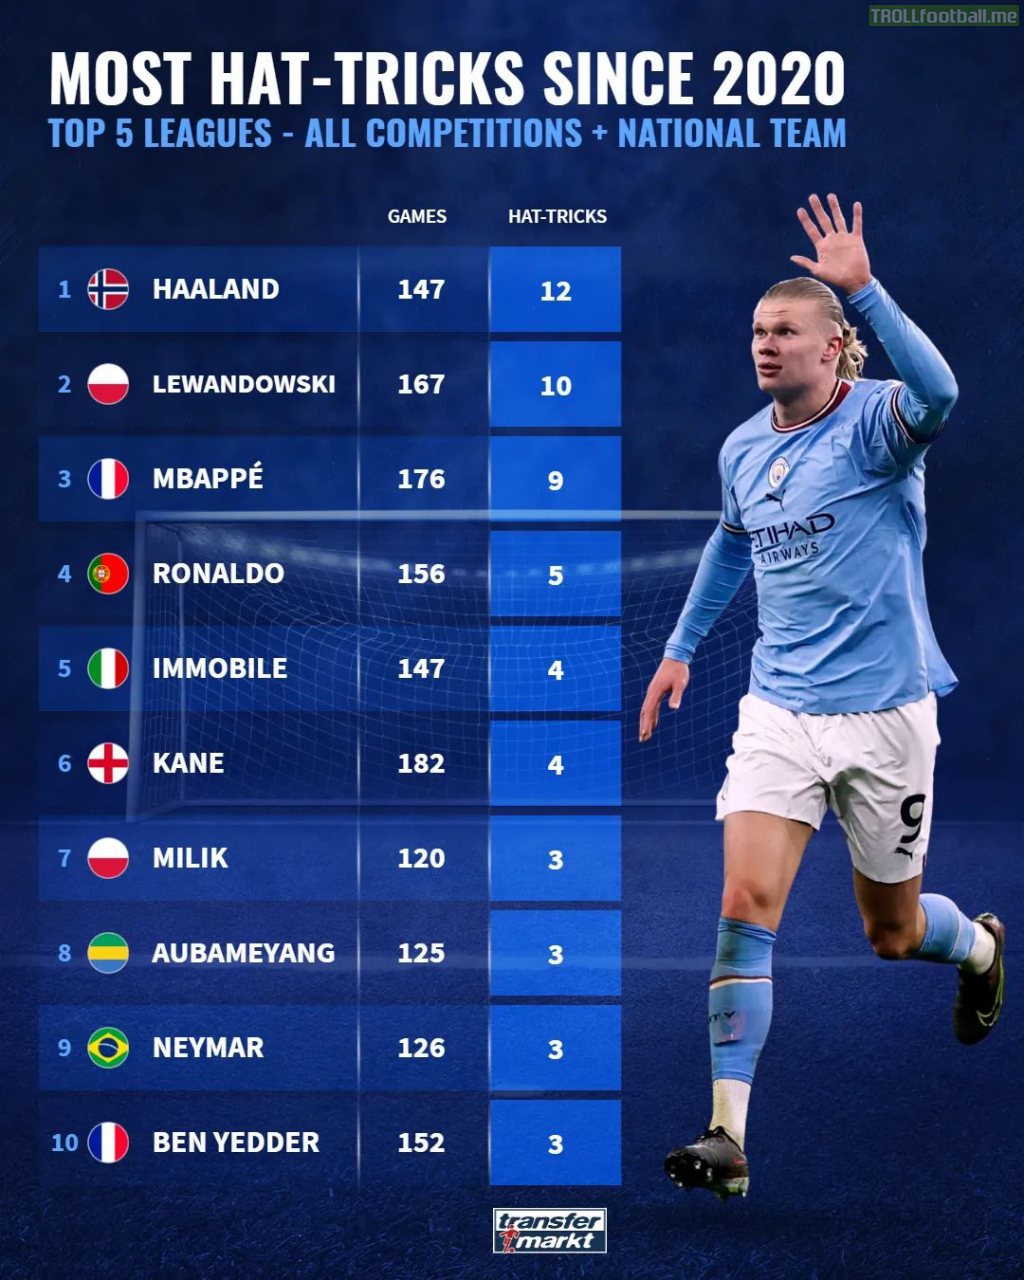 Most hat-tricks since 2020 (top 5 leagues, all competitions+national team)